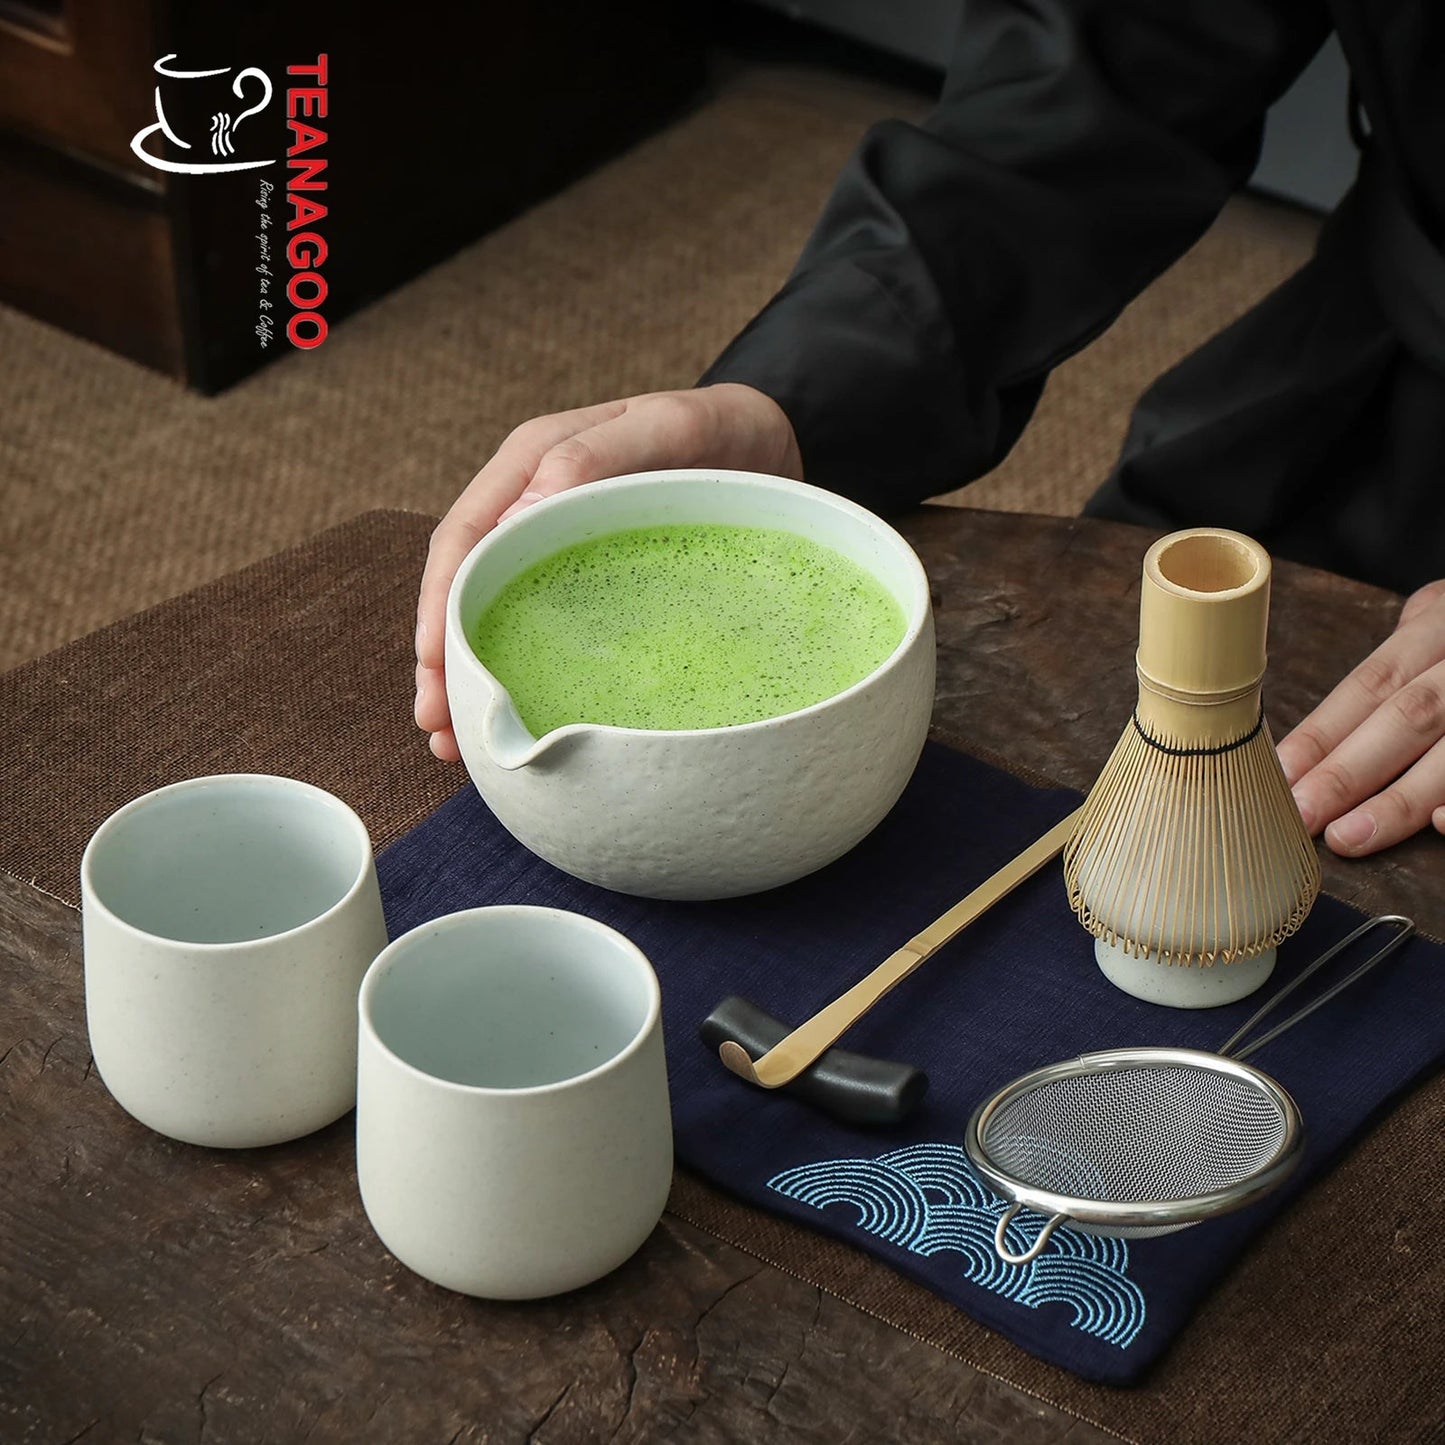 10-Pcs Matcha Kit Set, Whisk and Bowl with Spout & Measuring Spoon,  Japanese Tea Making Tools